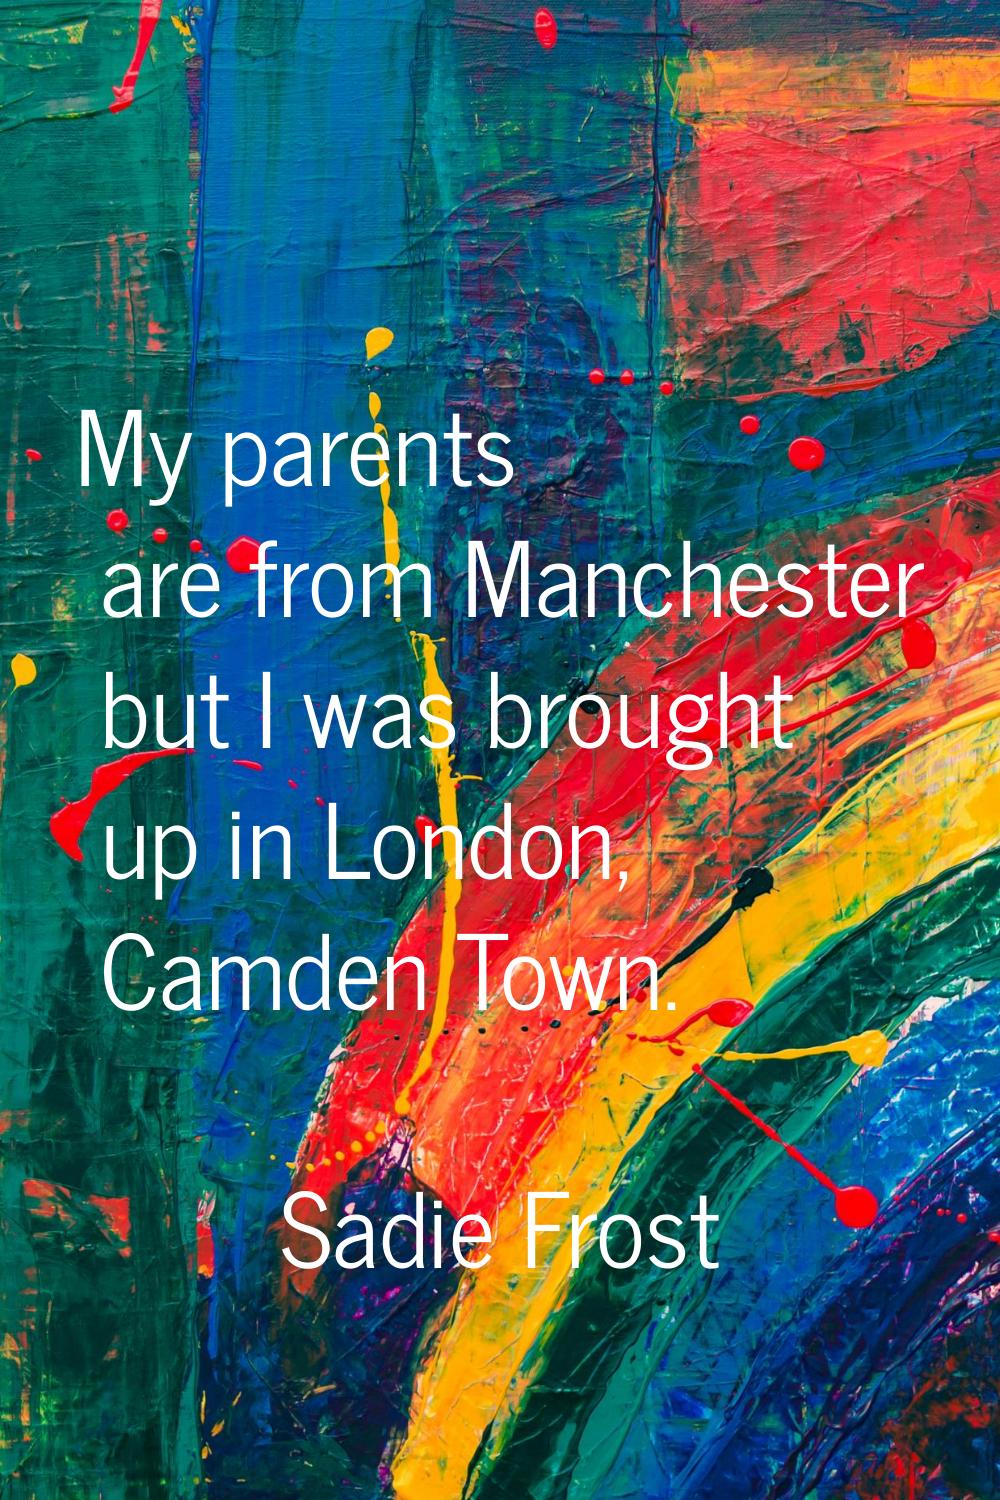 My parents are from Manchester but I was brought up in London, Camden Town.